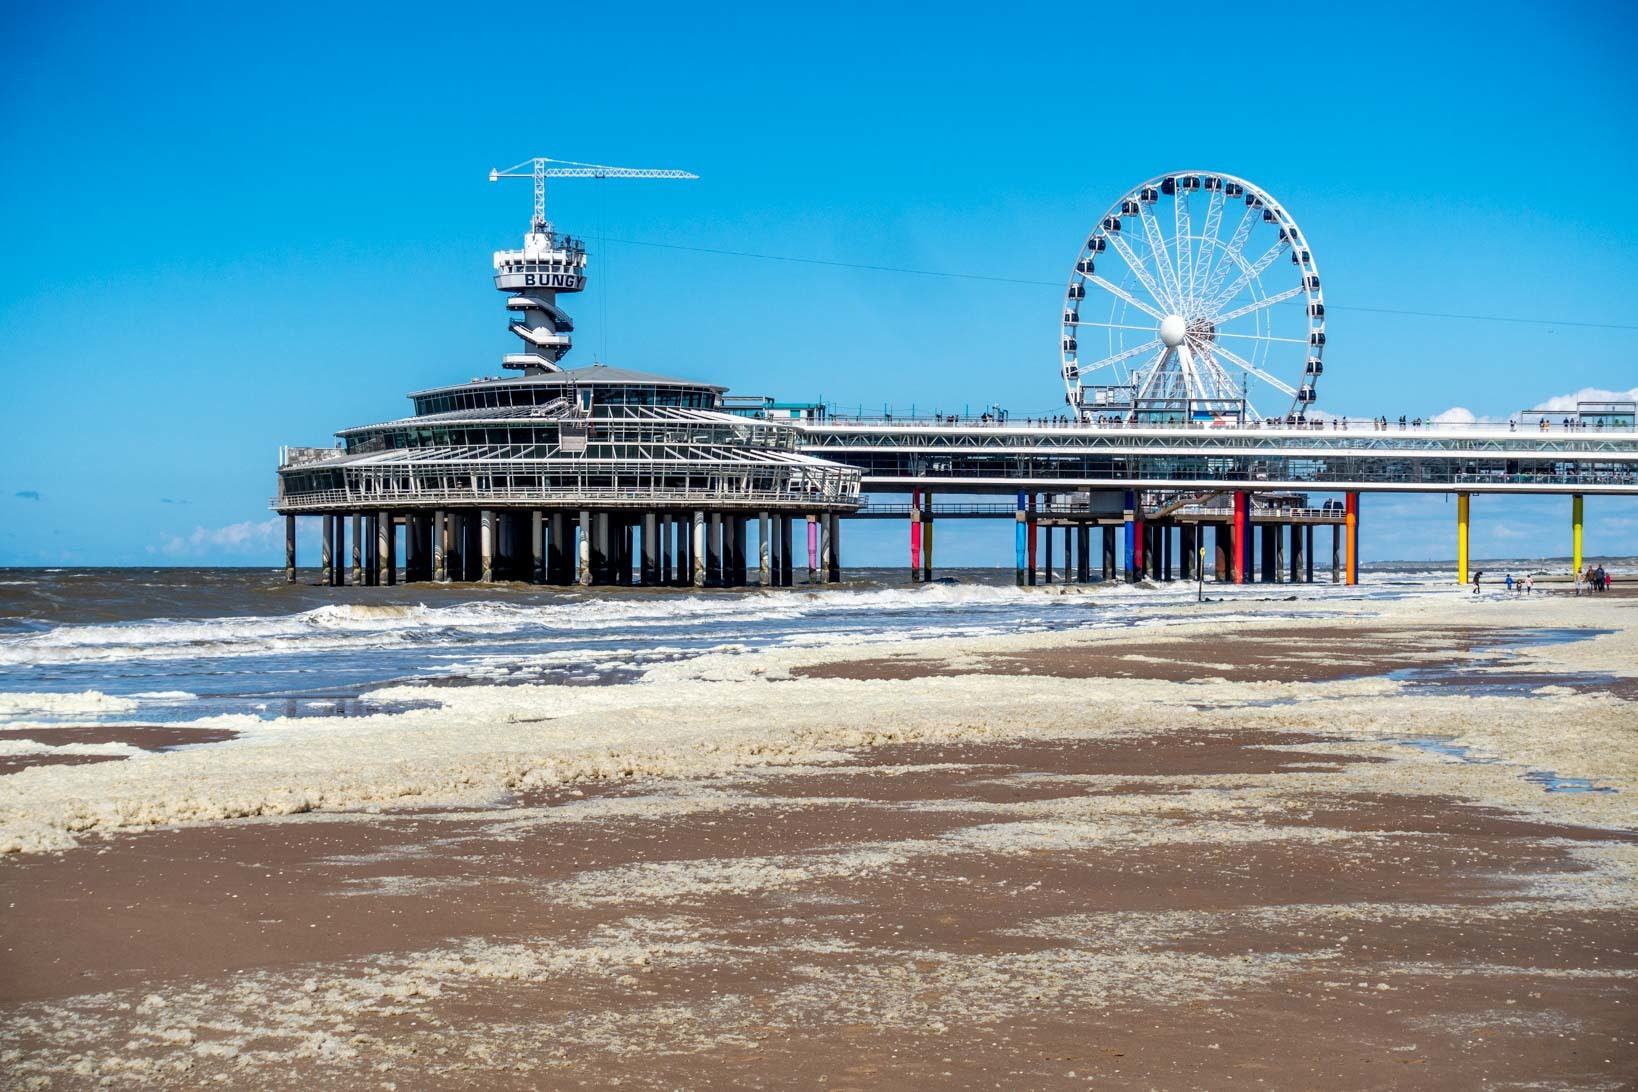 Large pier and Ferris wheel stretching from the beach to the ocean